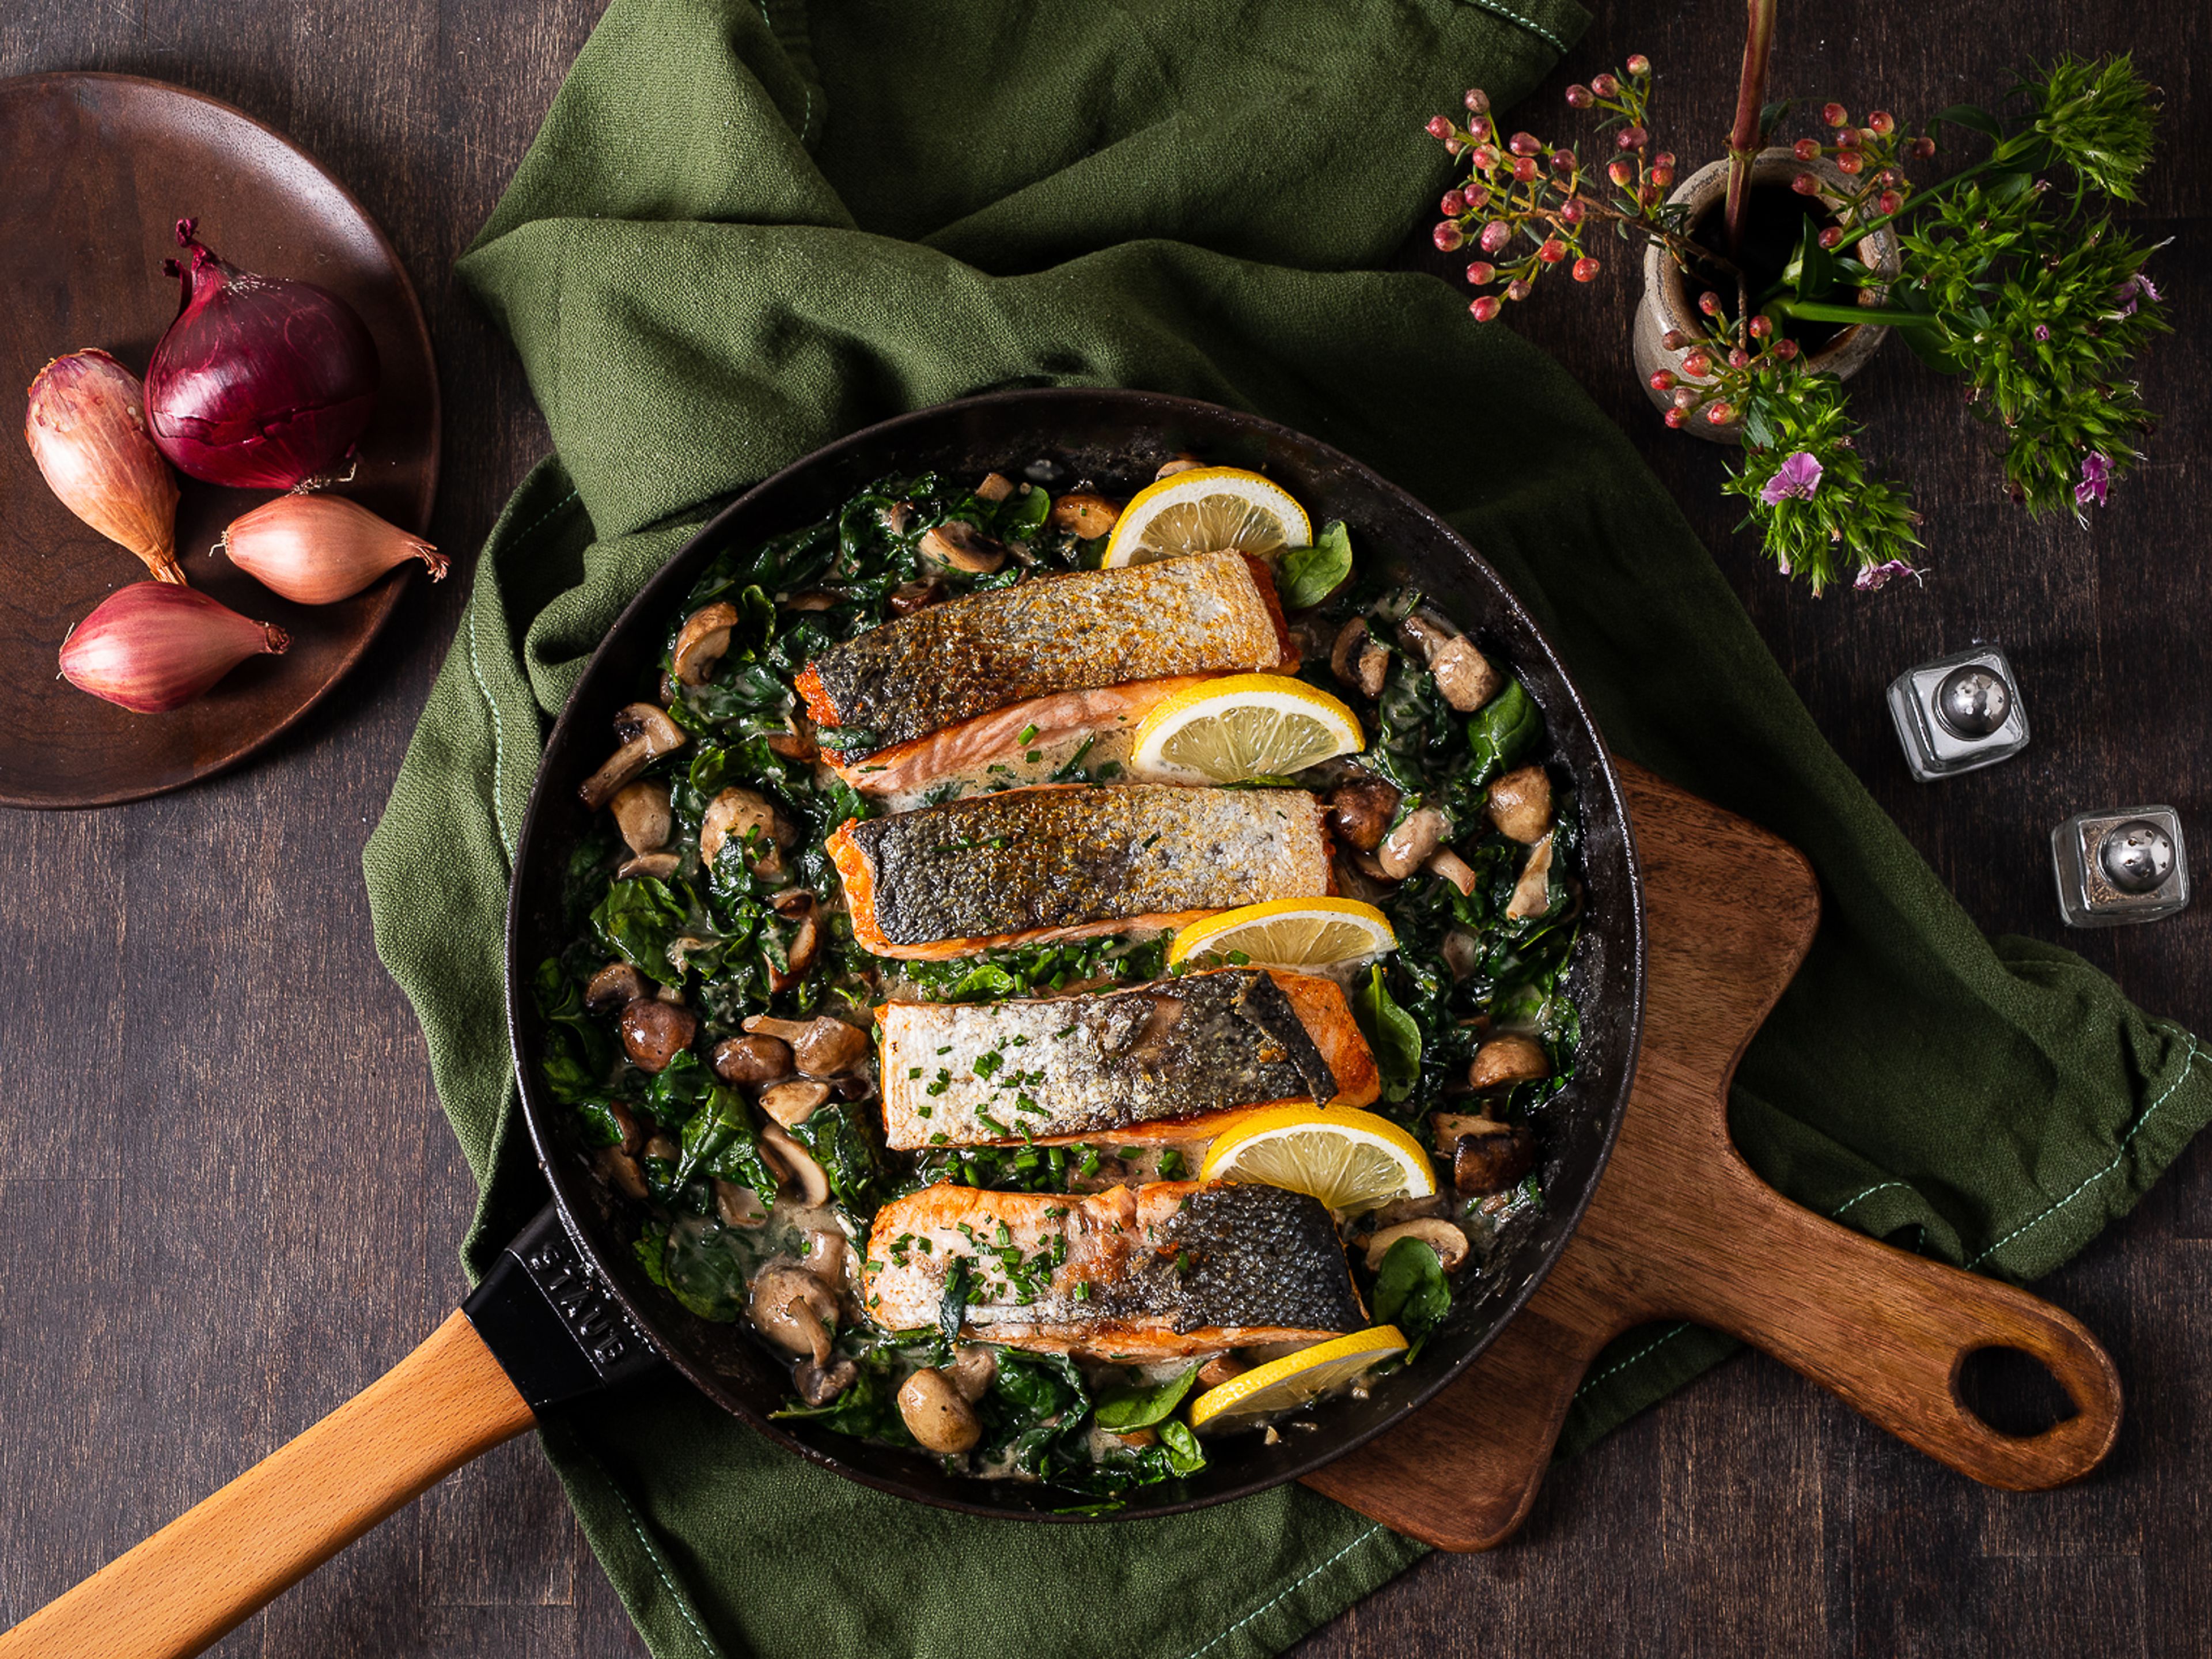 Lemony salmon with creamed spinach and mushrooms